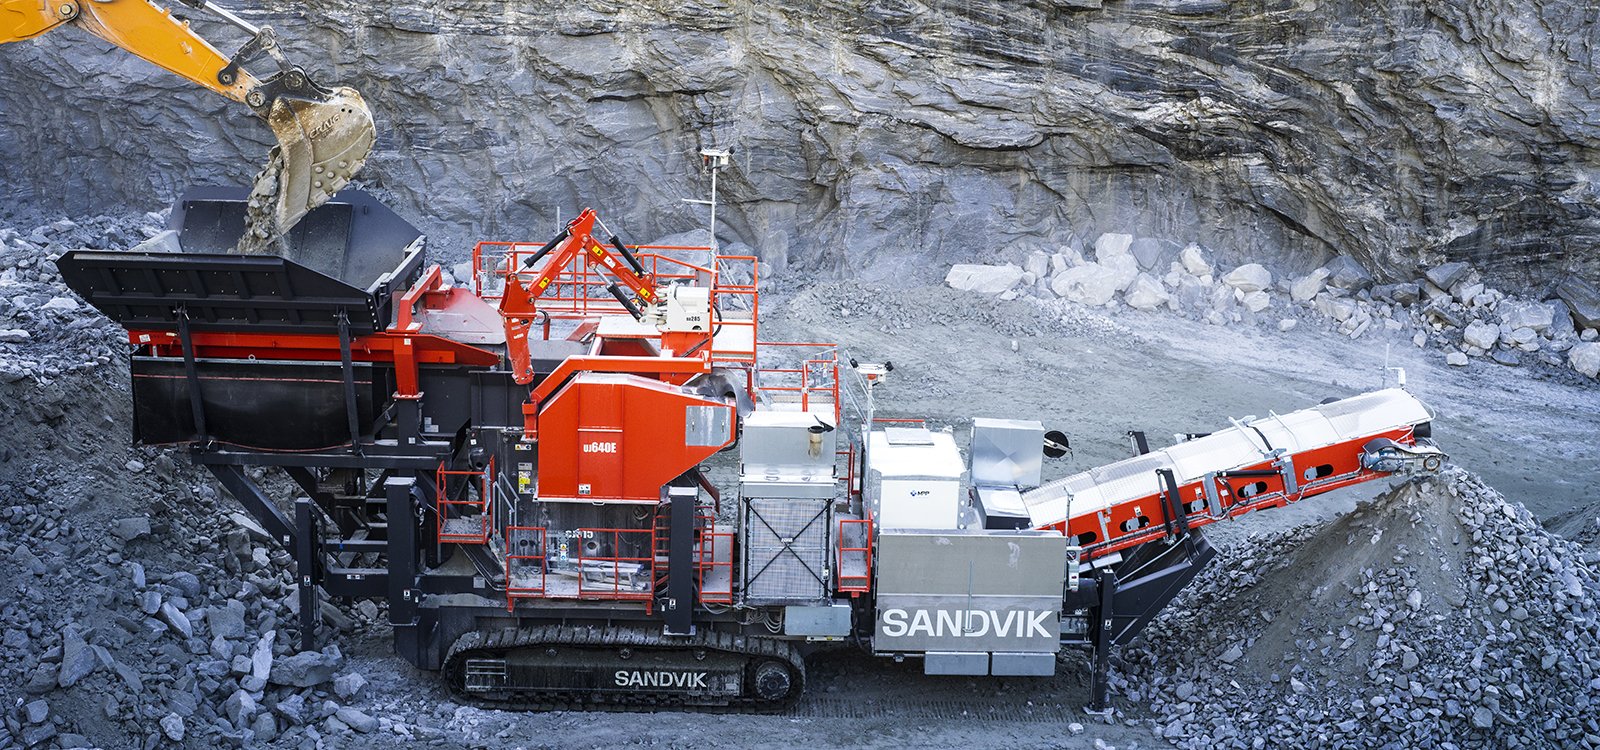 Sandvik UJ640 features an 18-cubic-metre feeder hopper extension to enable faster loading.